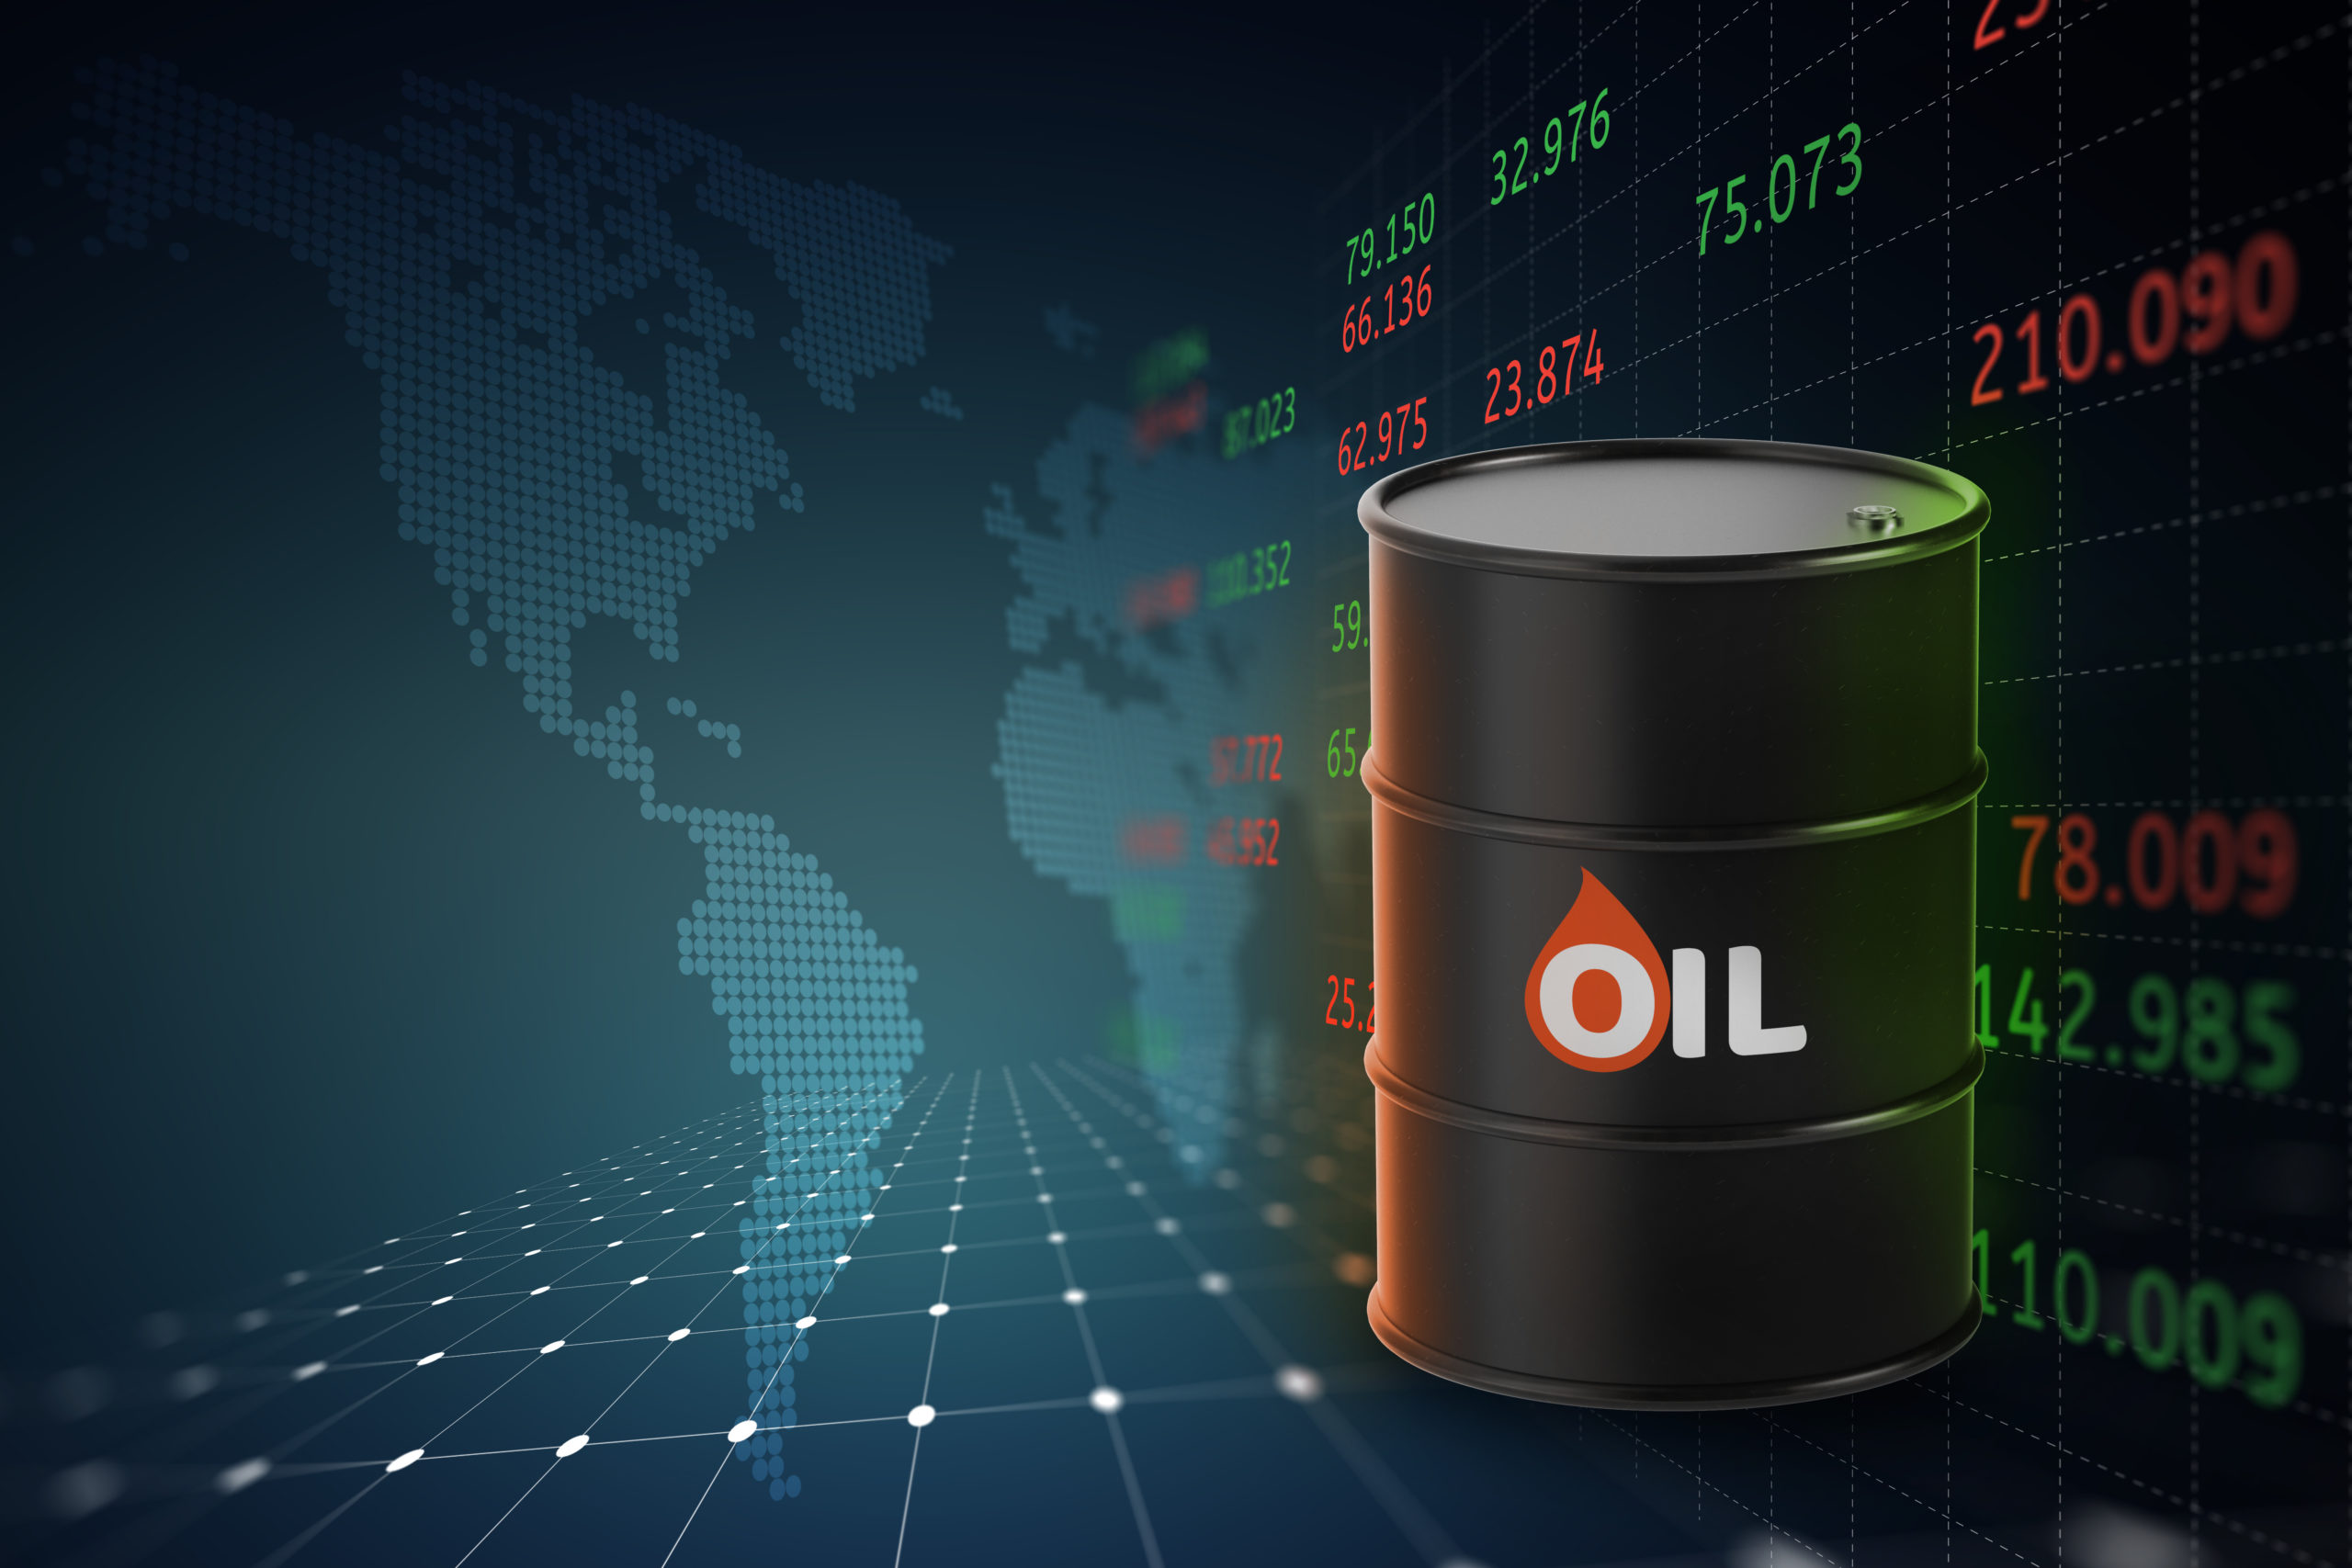 Oil Edges Higher on Concerns Over Russia, Libya Supply Disruption